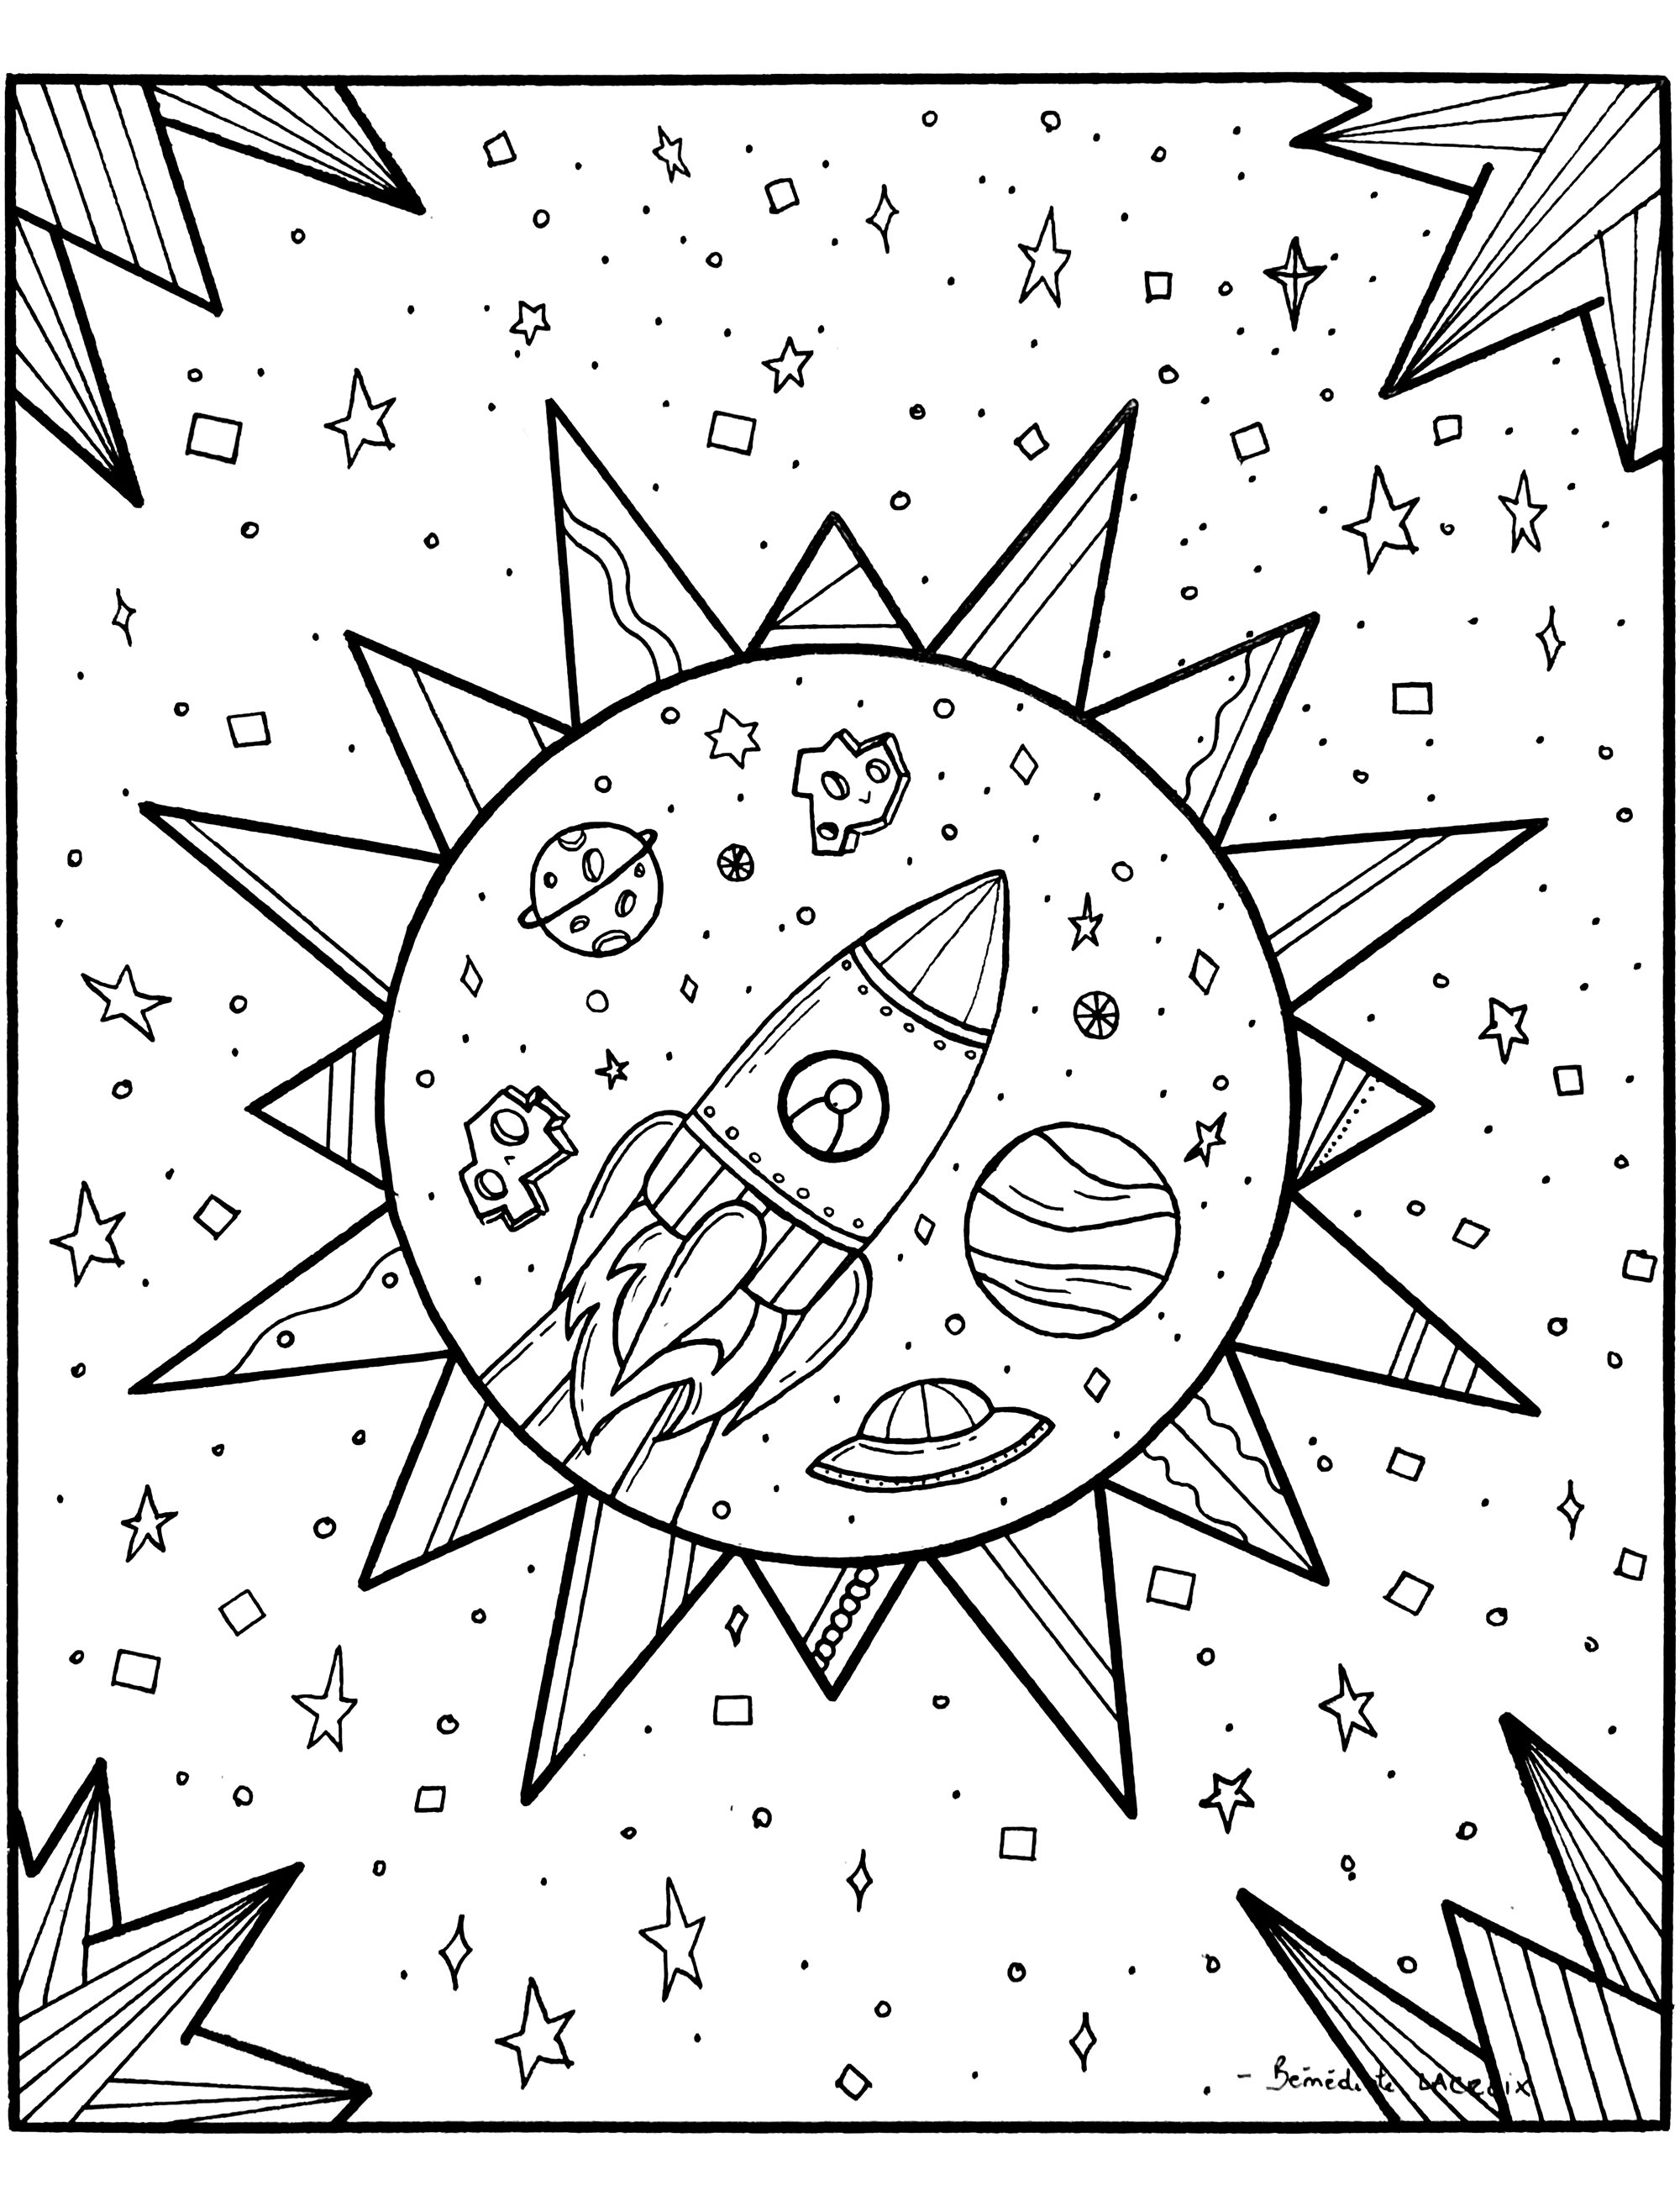 This rocket travels the interstellar space of the galaxy. Color the planets, meteorites, shuttles and stars she meets on her course.